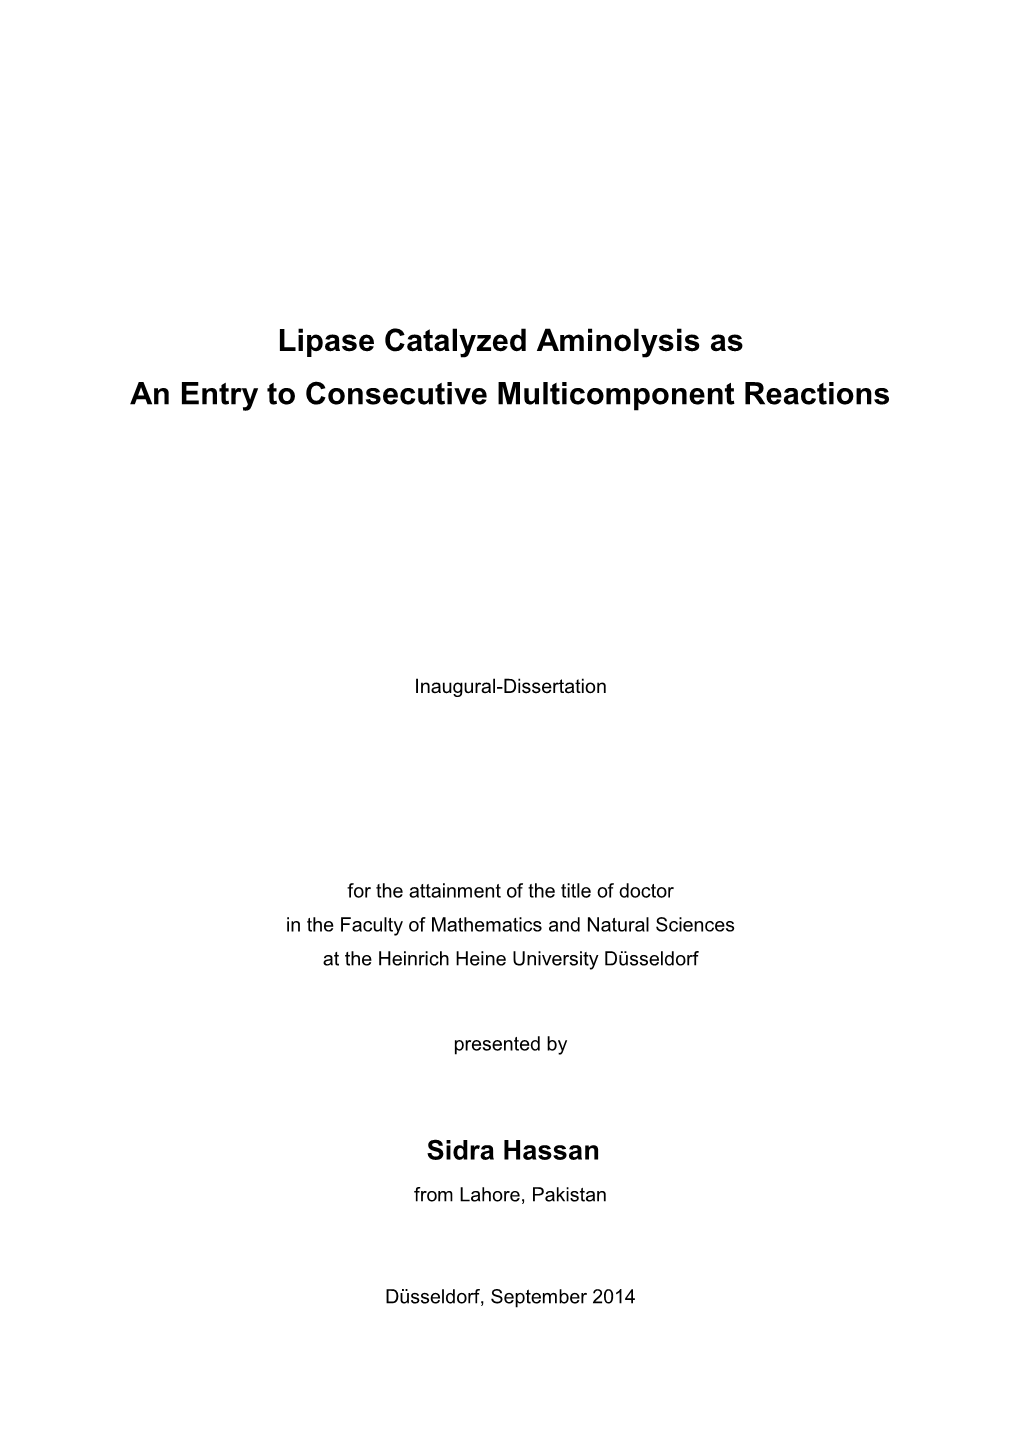 Lipase Catalyzed Aminolysis As an Entry to Consecutive Multicomponent Reactions